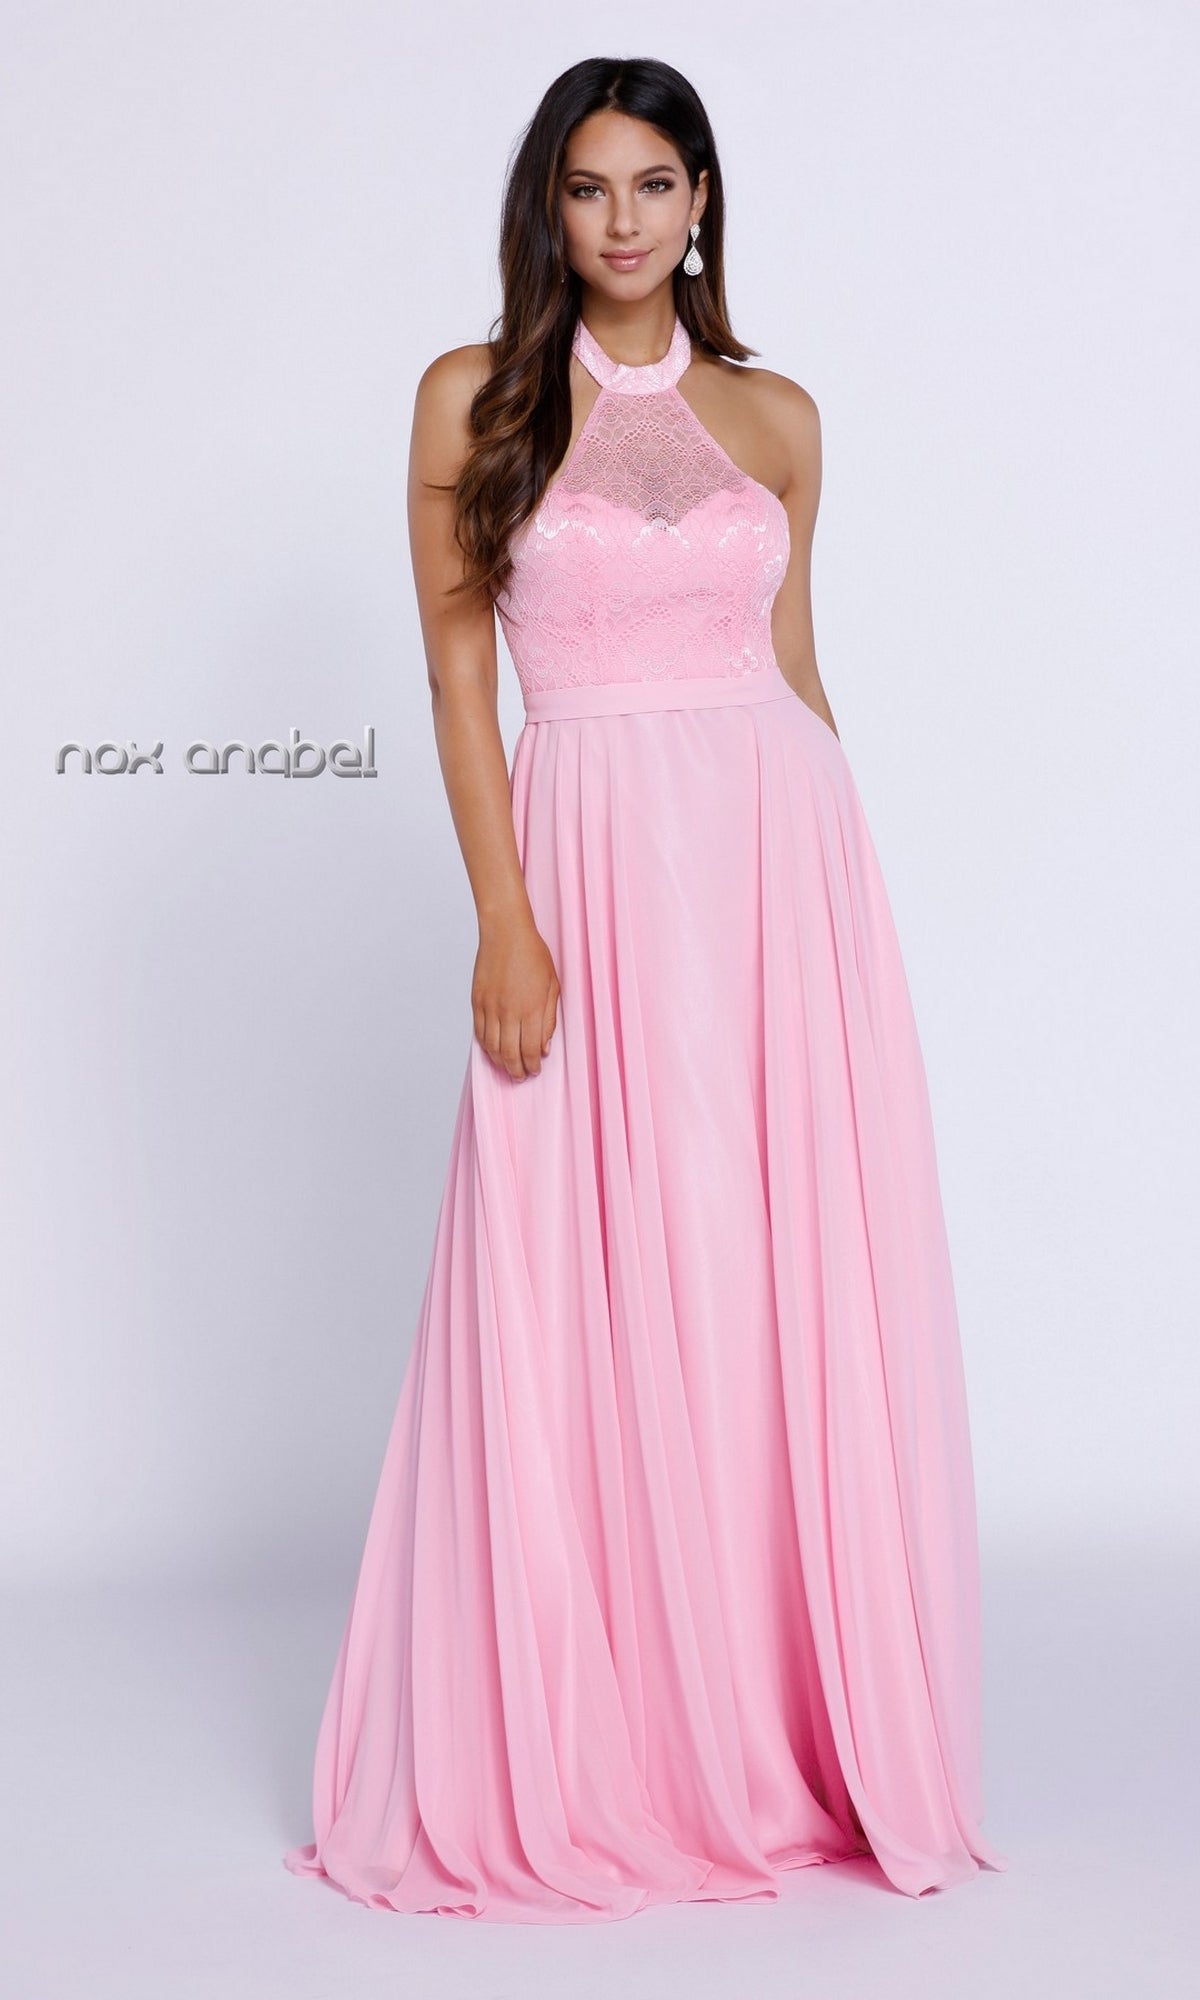 Baby Pink Long Formal Evening Gown With Lace Halter Top